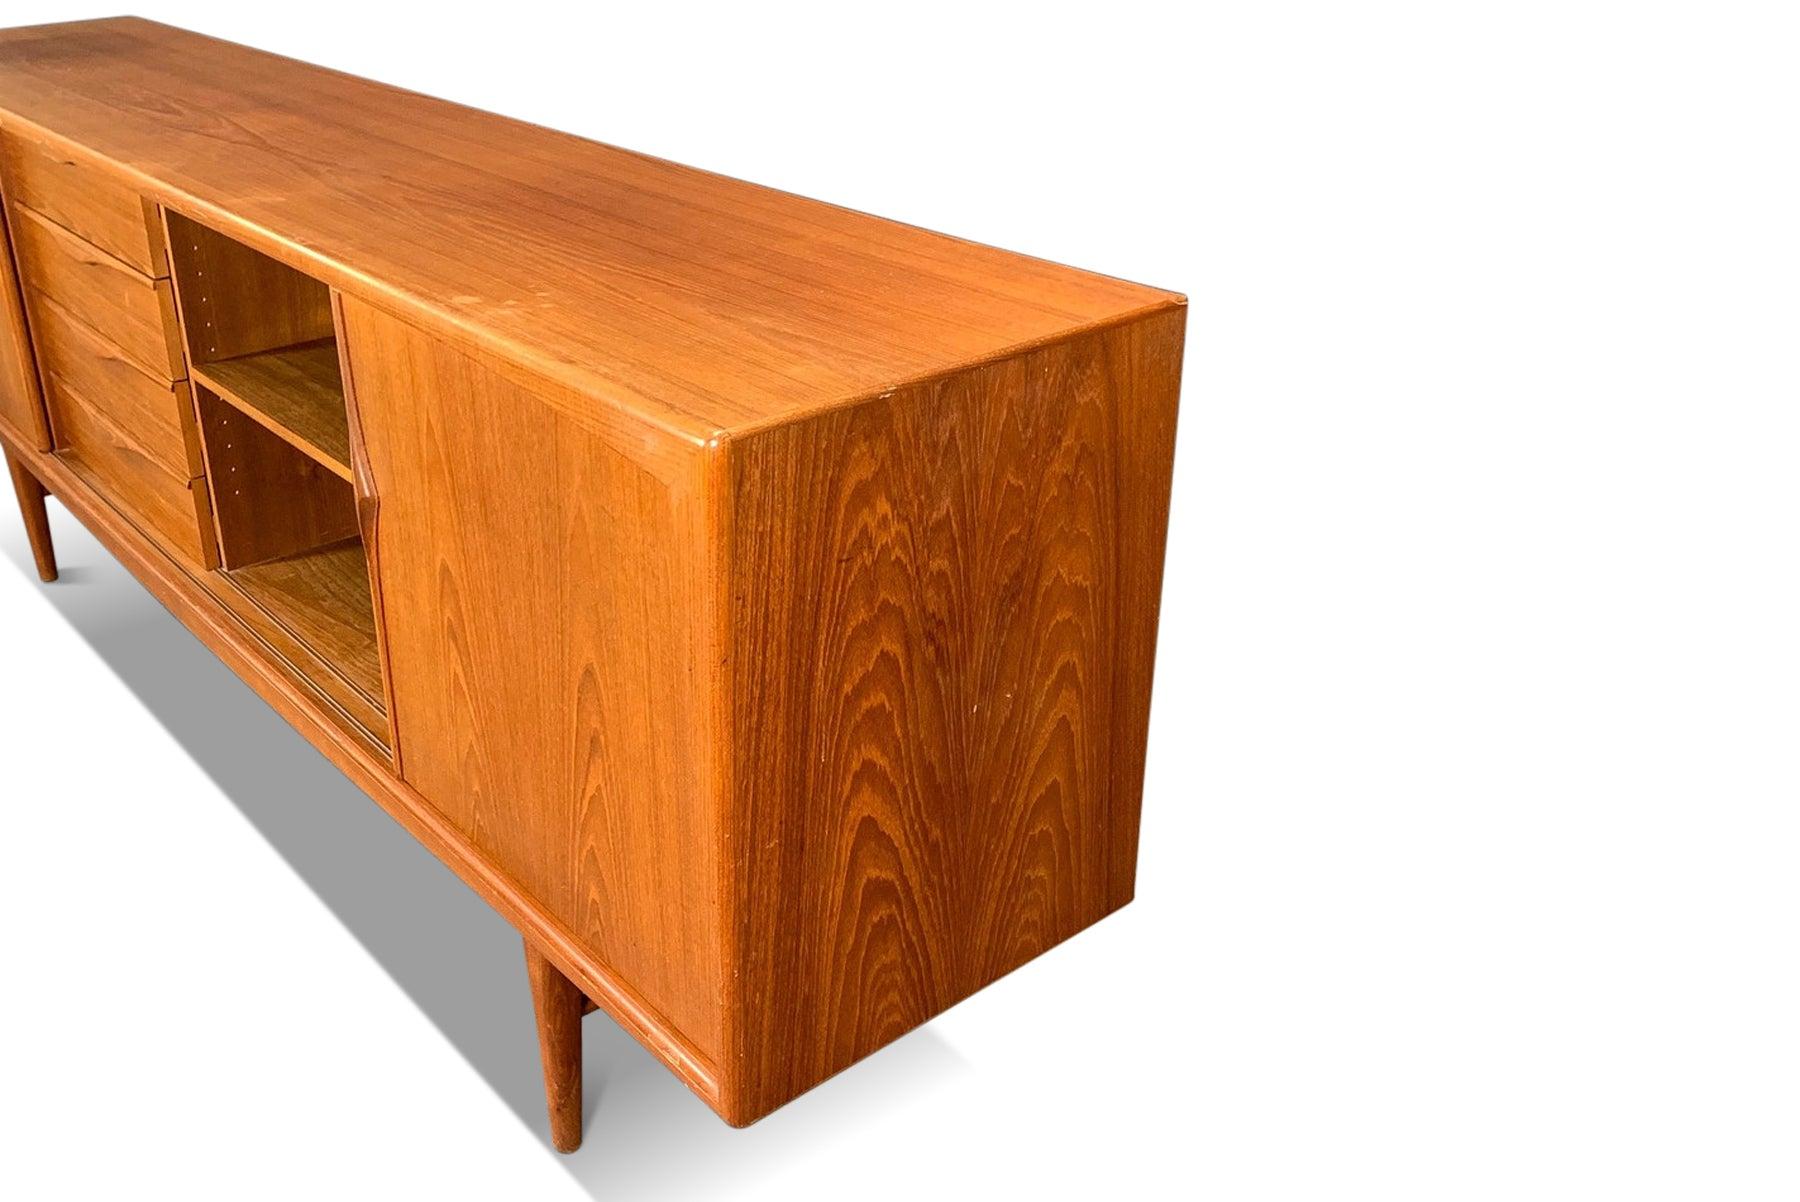 Origin: Denmark
Designer: Axel Christiansen
Manufacturer: ACO Møbler
Era: 1960s
Materials: Teak
Measurements: 94.5″ wide x 18″ deep x 34.75″ tall

Condition: In excellent original condition with typical wear for its vintage. Price includes